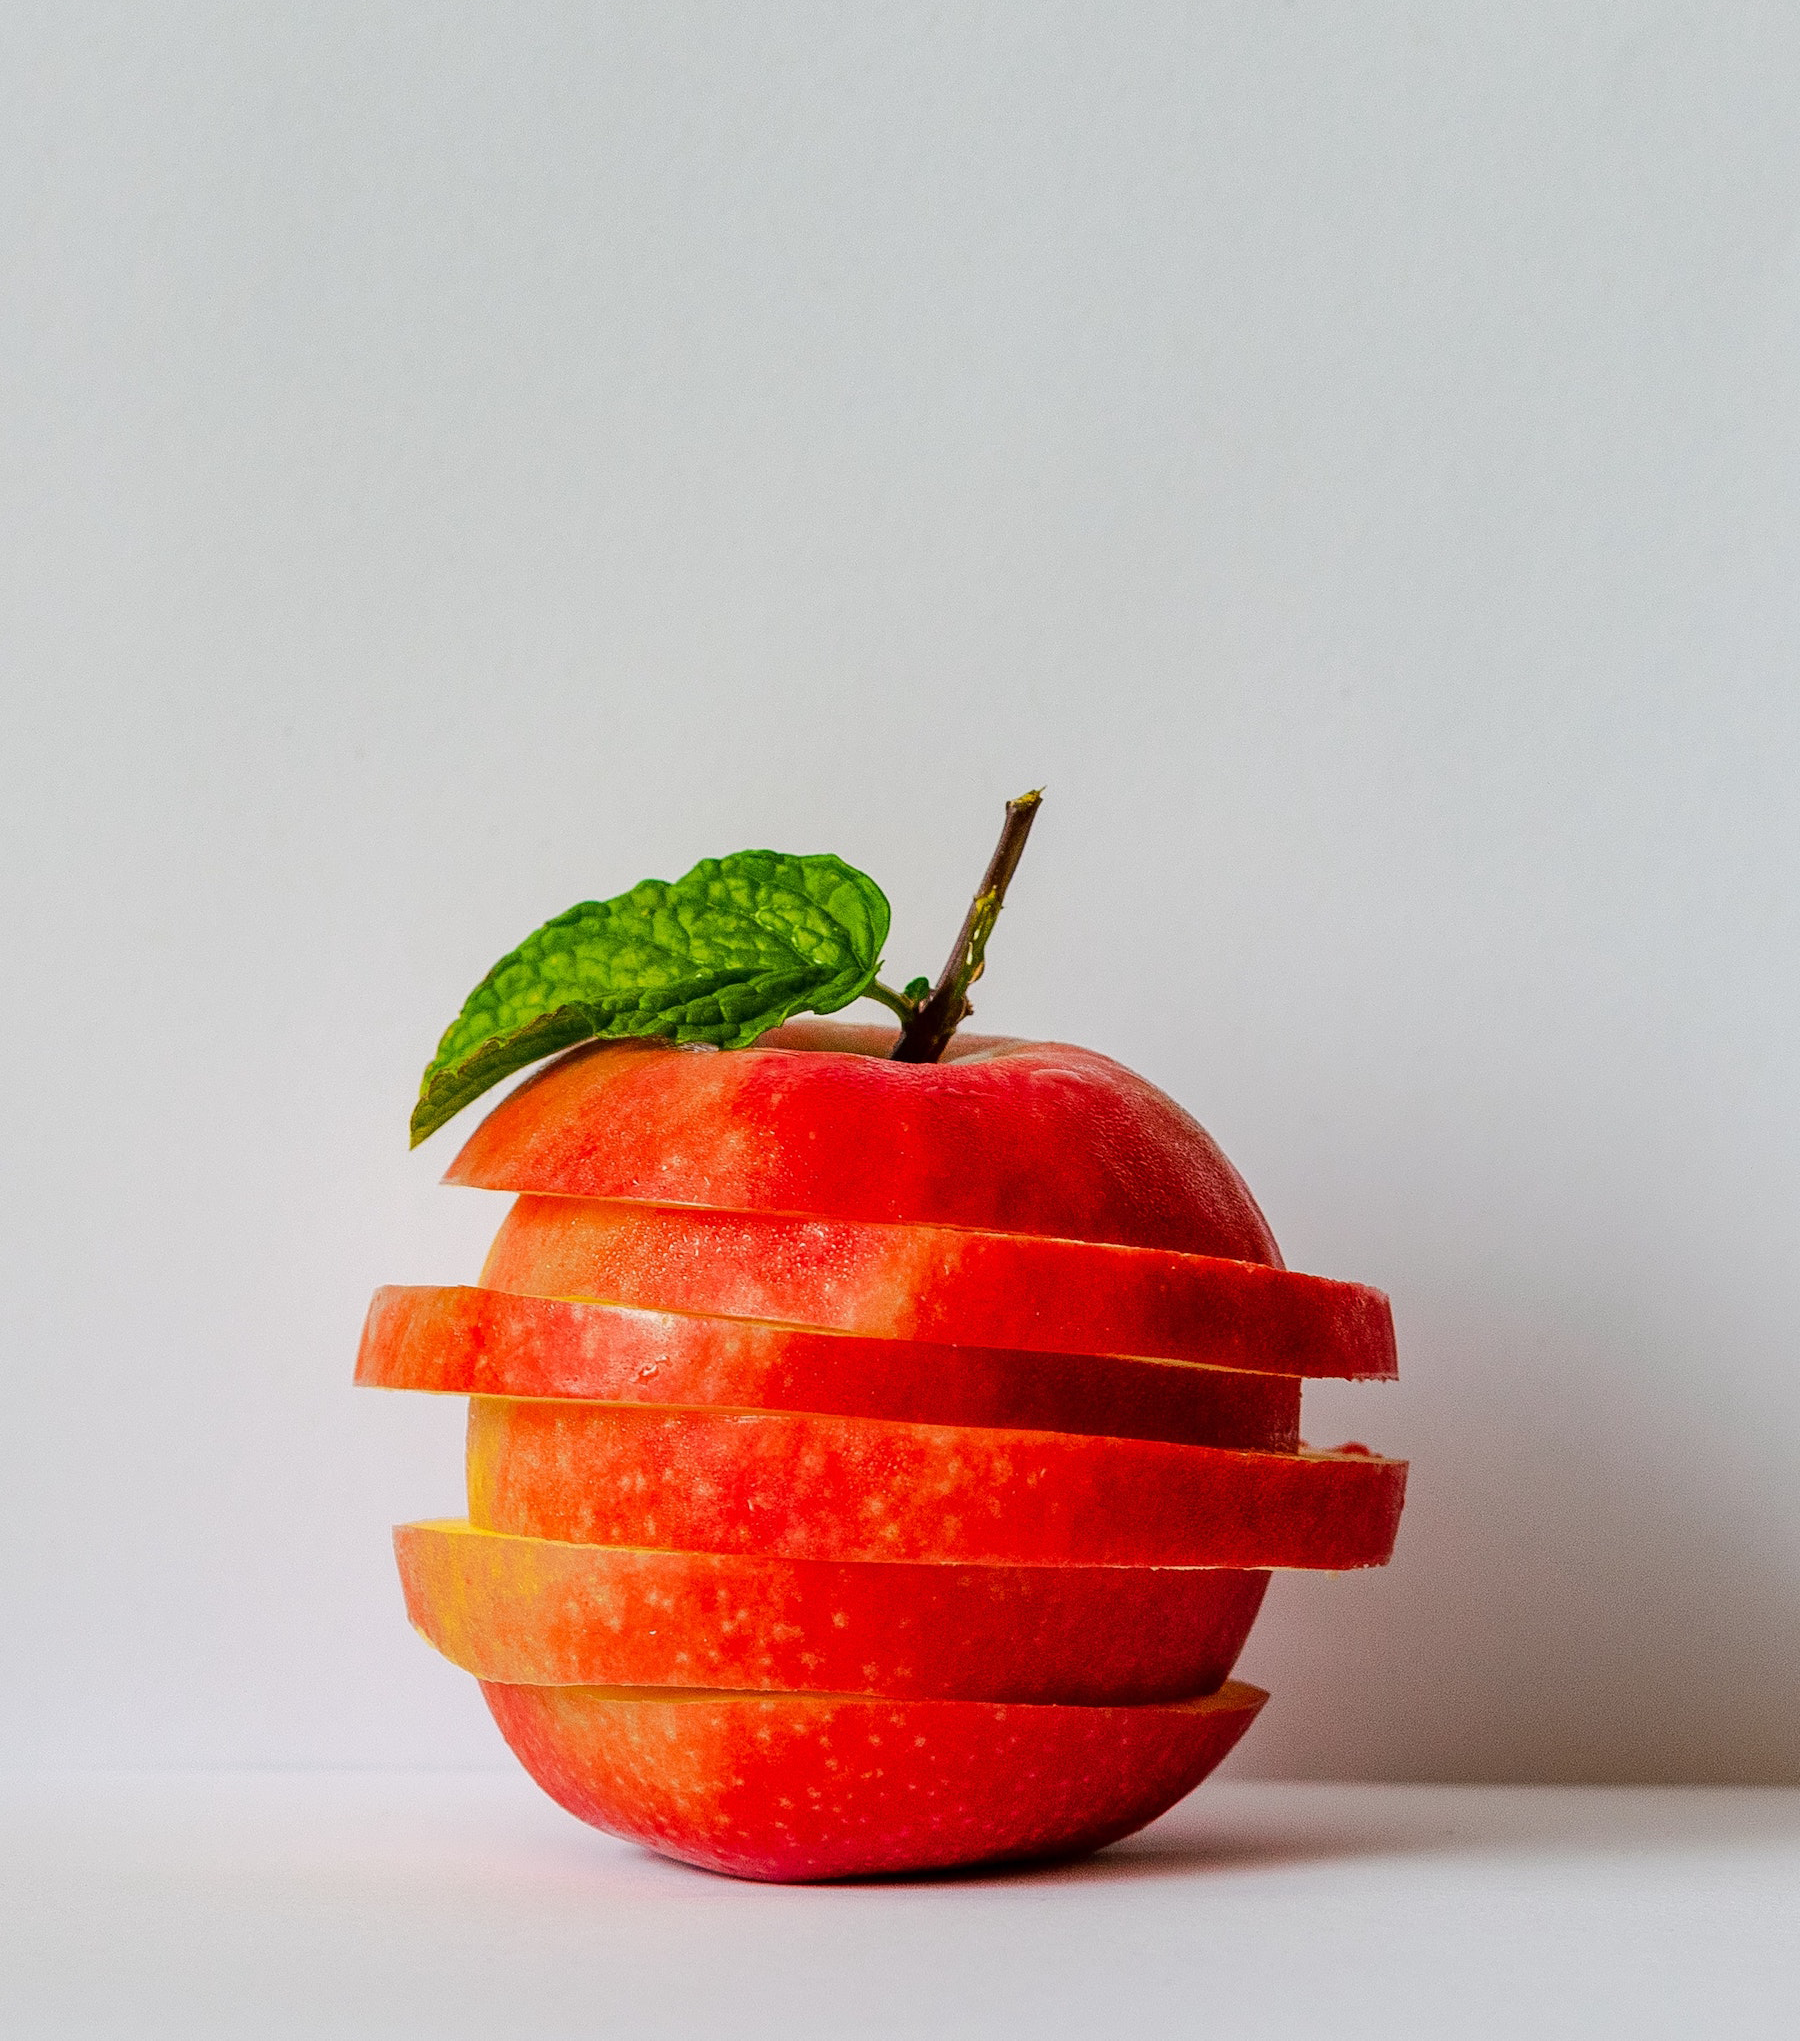 Image of a Sliced Red Apple